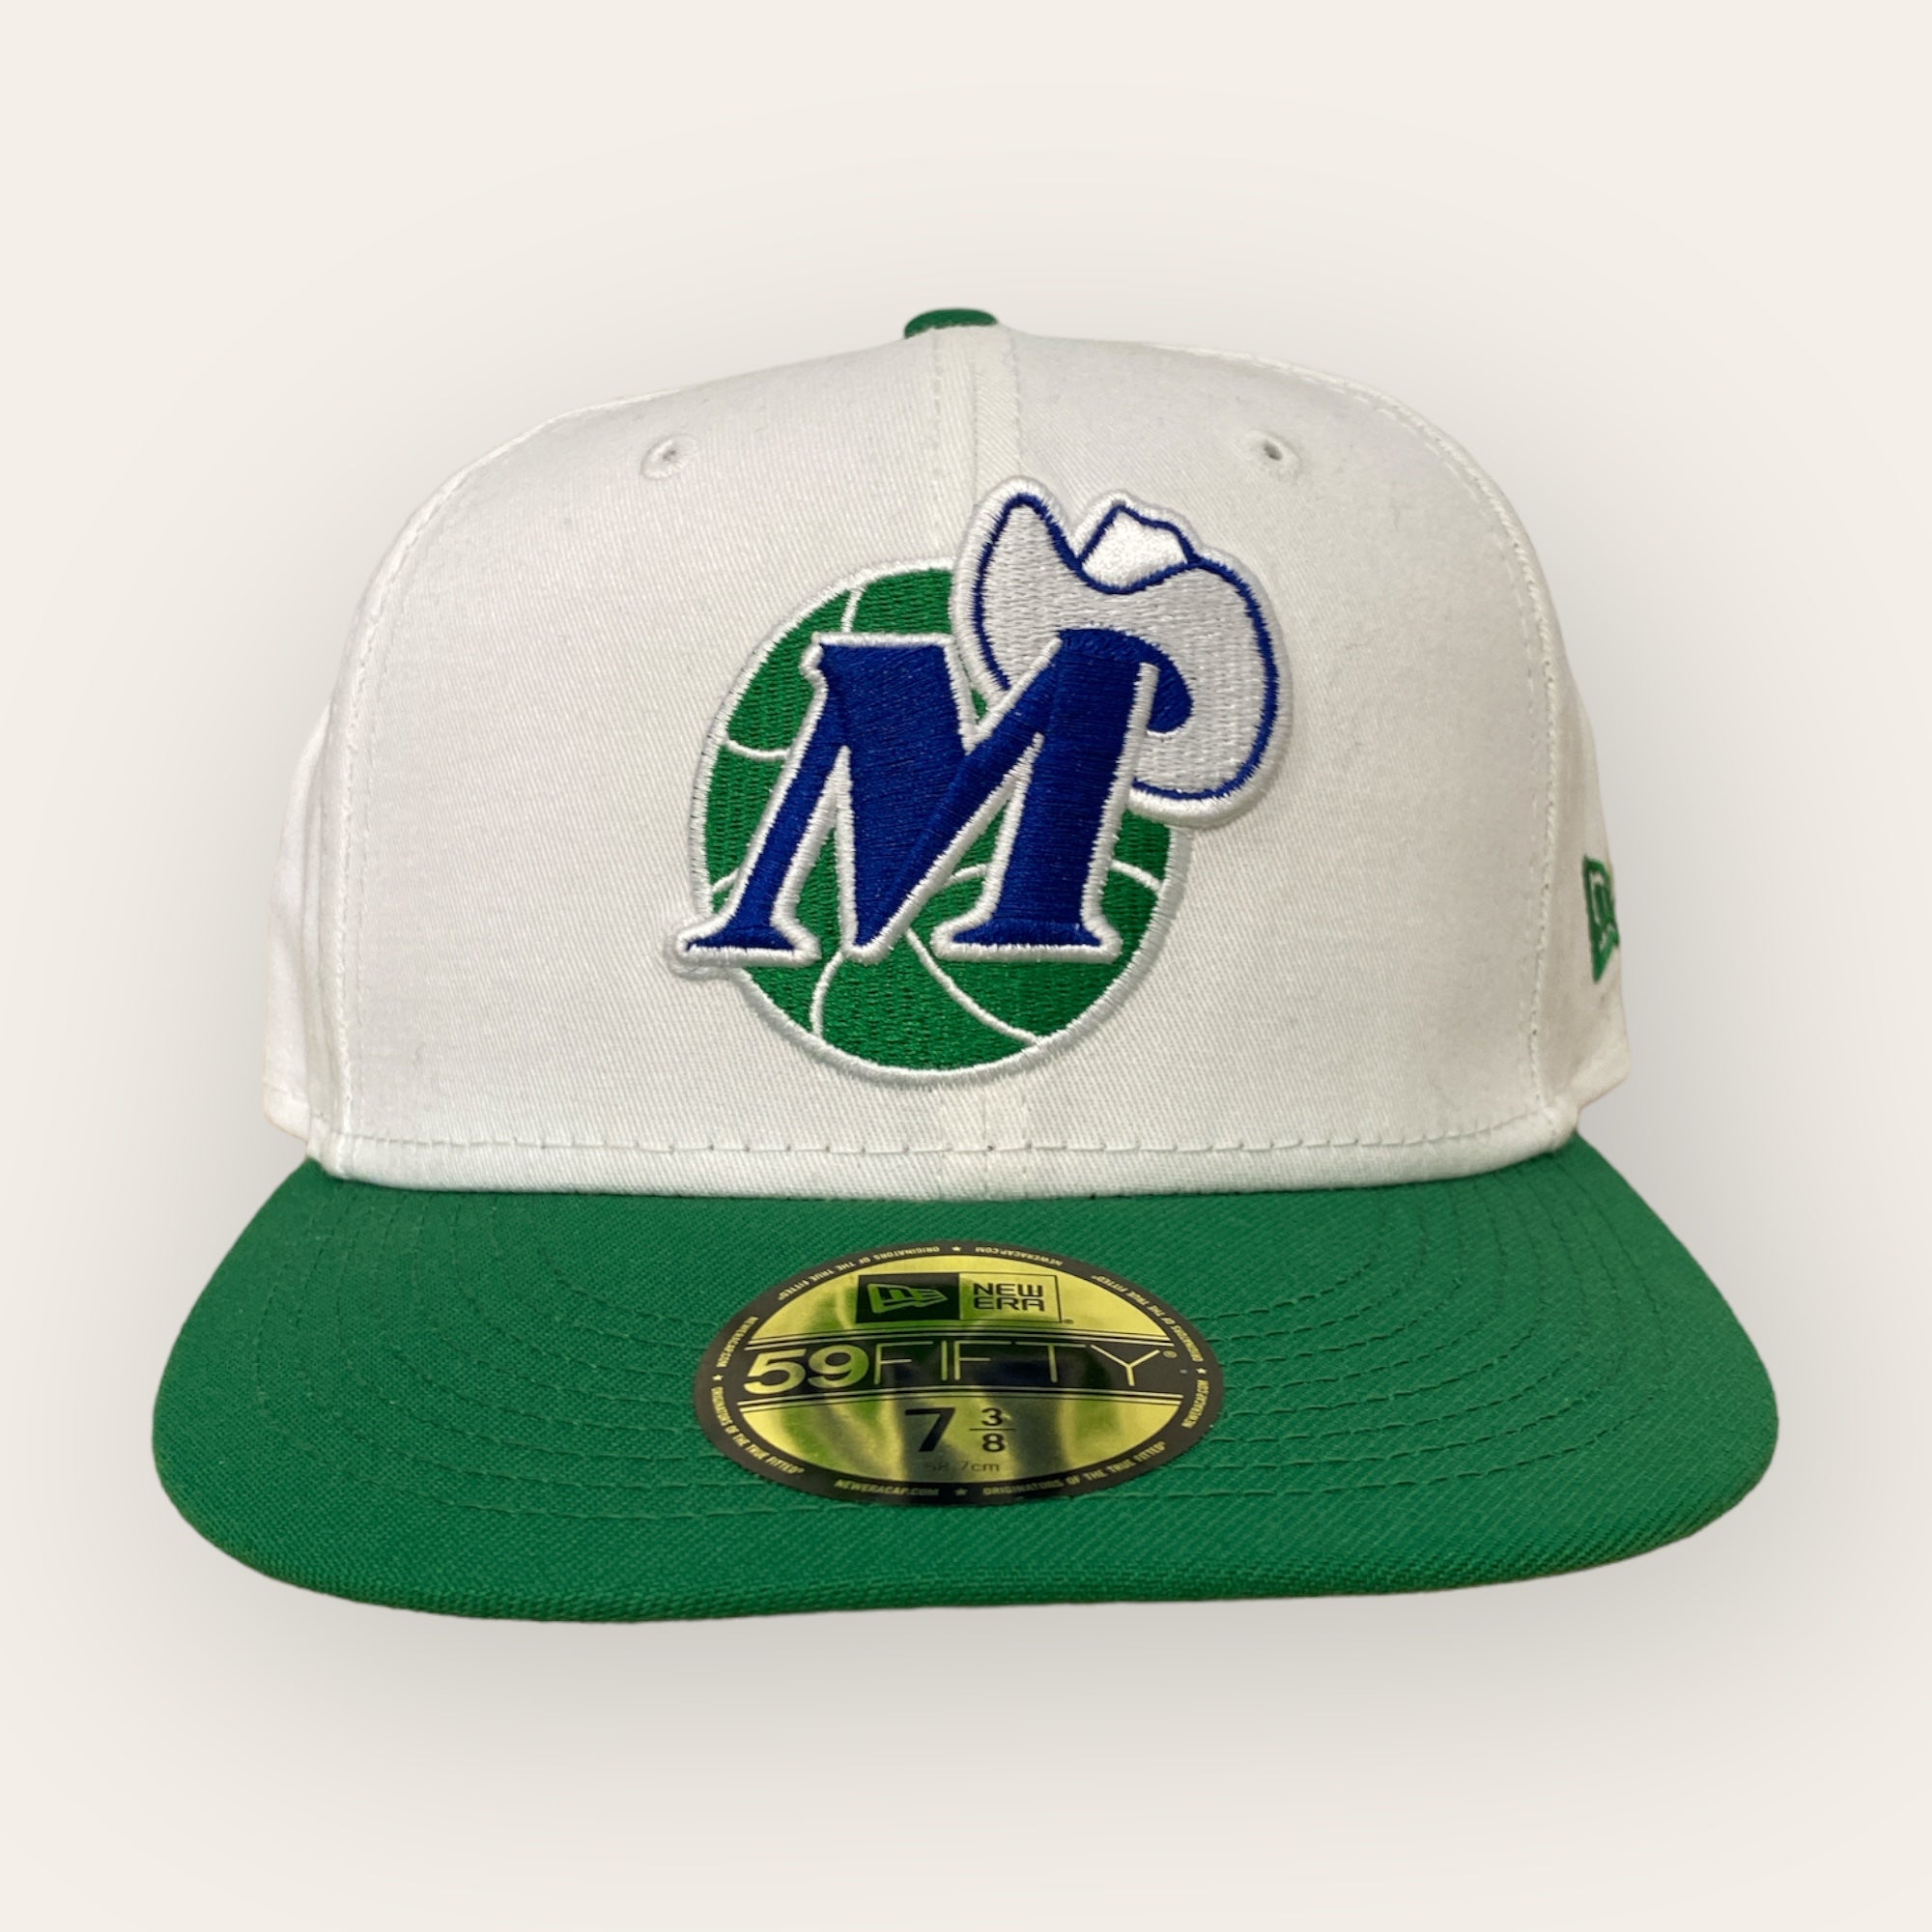 Dallas Mavs Fitted Hat Size 7 3/8